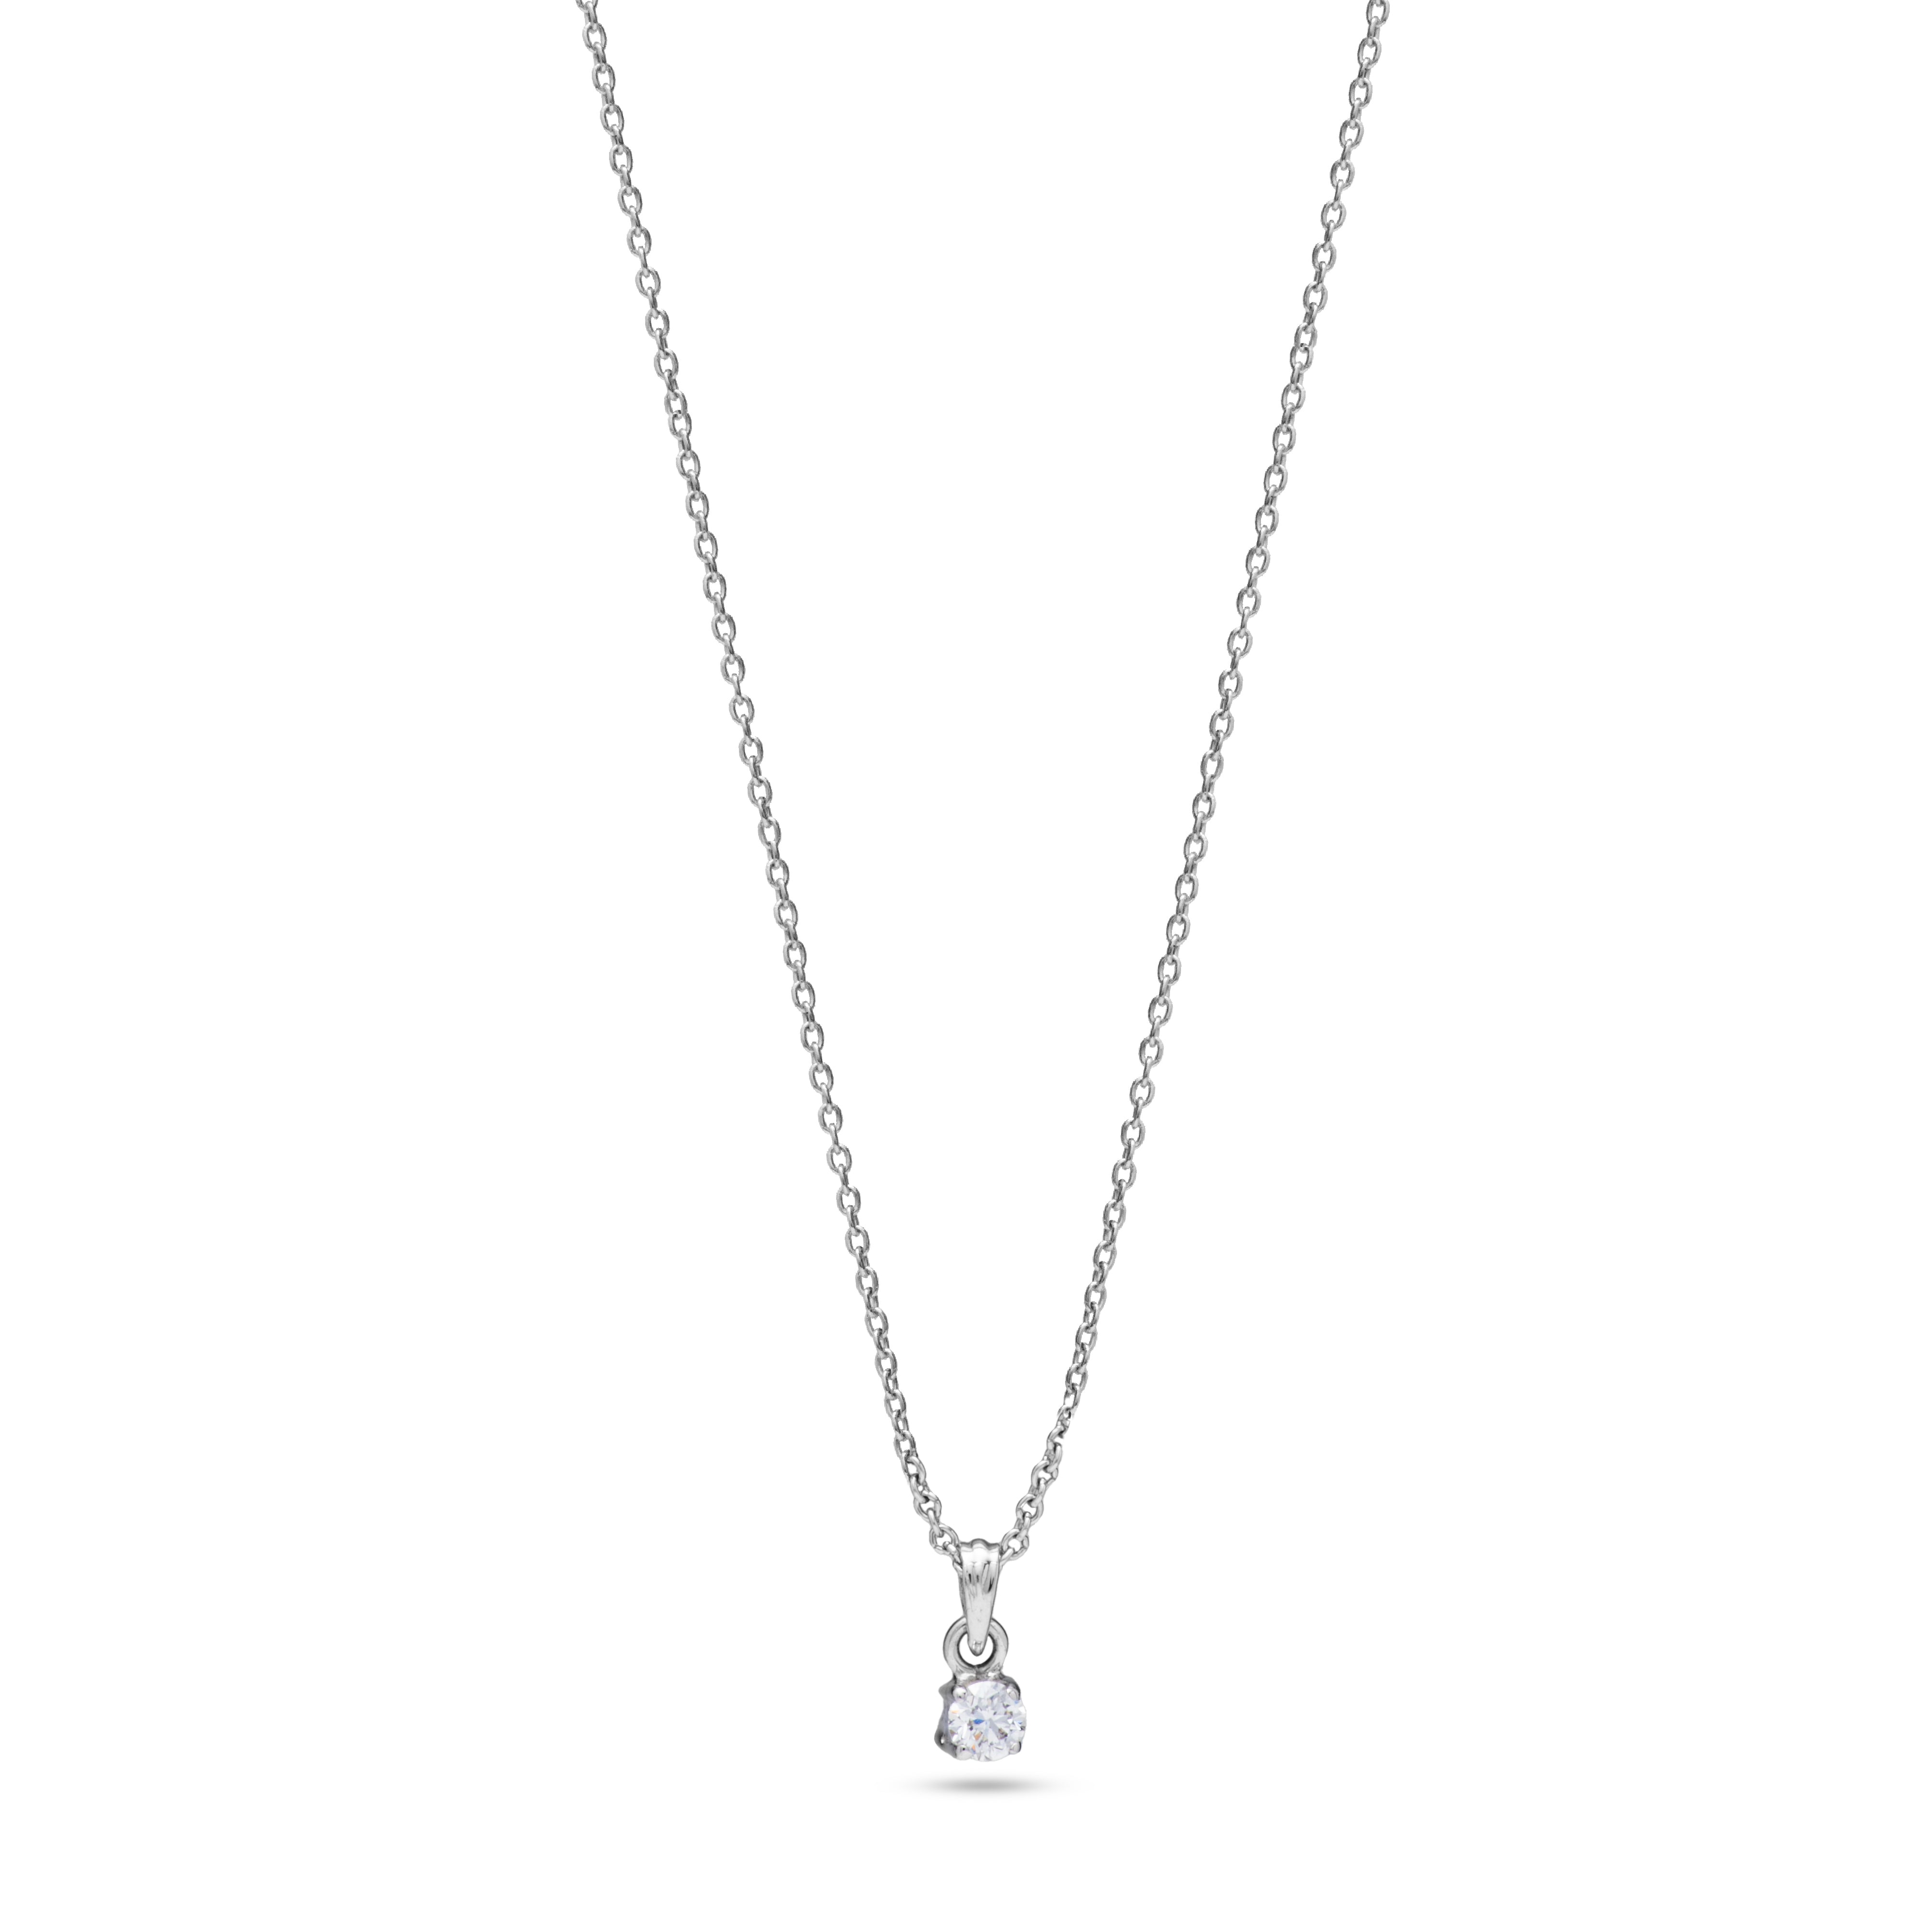 a beautiful diamond necklace in 18K White gold - S-B51B/P